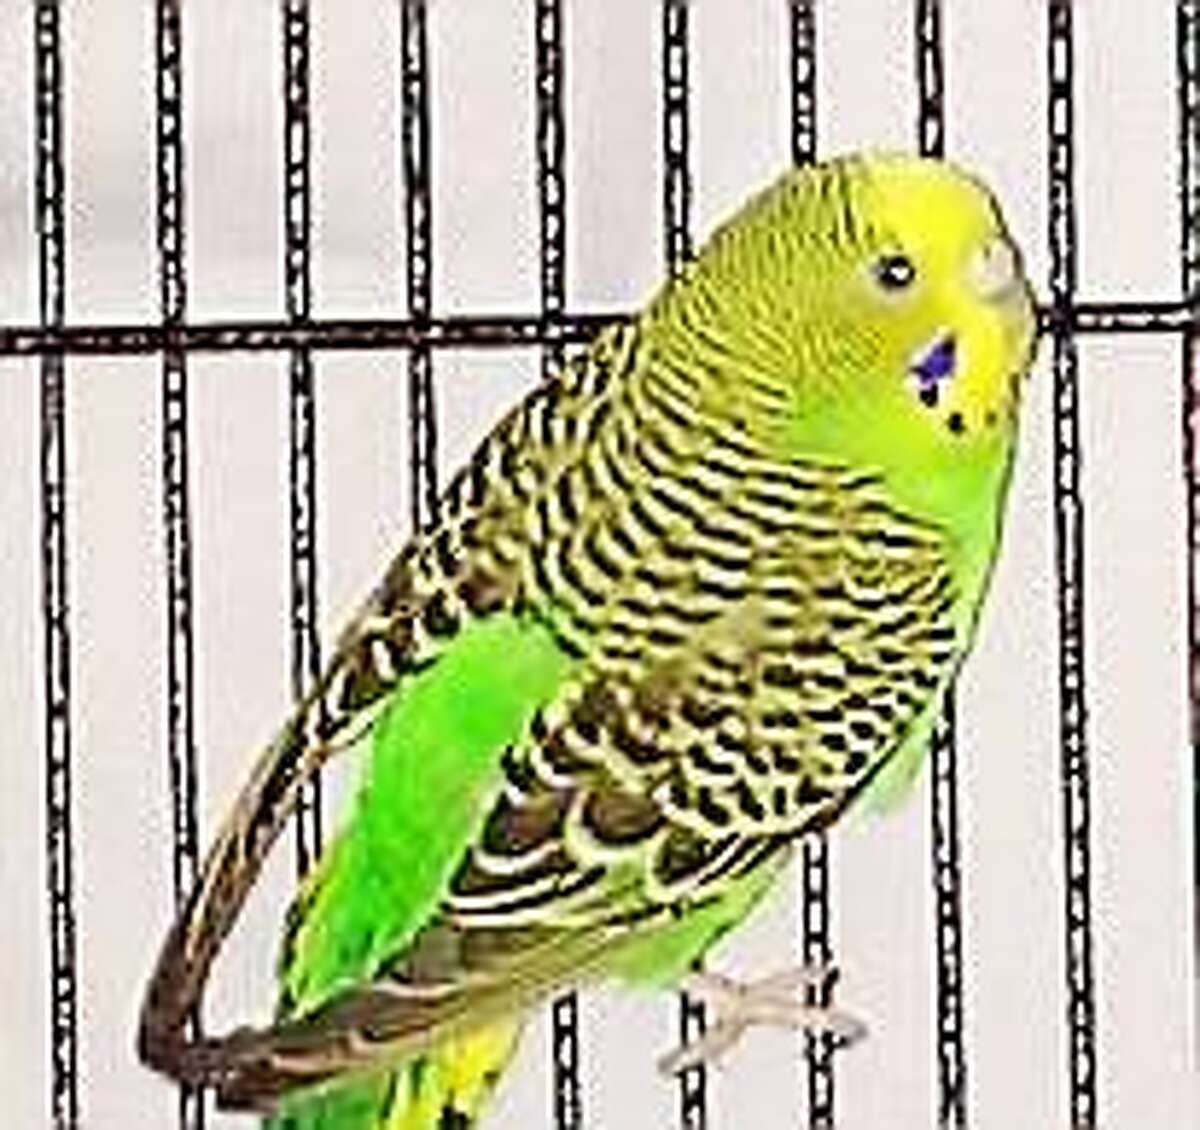 A little greenie There are six parakeets available in our bird booth at the Newington shelter ranging in age from 3 months to 2 years. They are a beautiful array of light green, yellow and aqua bringing tropical lushness right to your fingertips. Get to know our little warm-footed friends and bring a little sunshine and song into your home today. Inquiries for adoption should be made at the Connecticut Humane Society located at 701 Russell Road in Newington or by calling (860) 594-4500 or toll free at 1-800-452-0114.